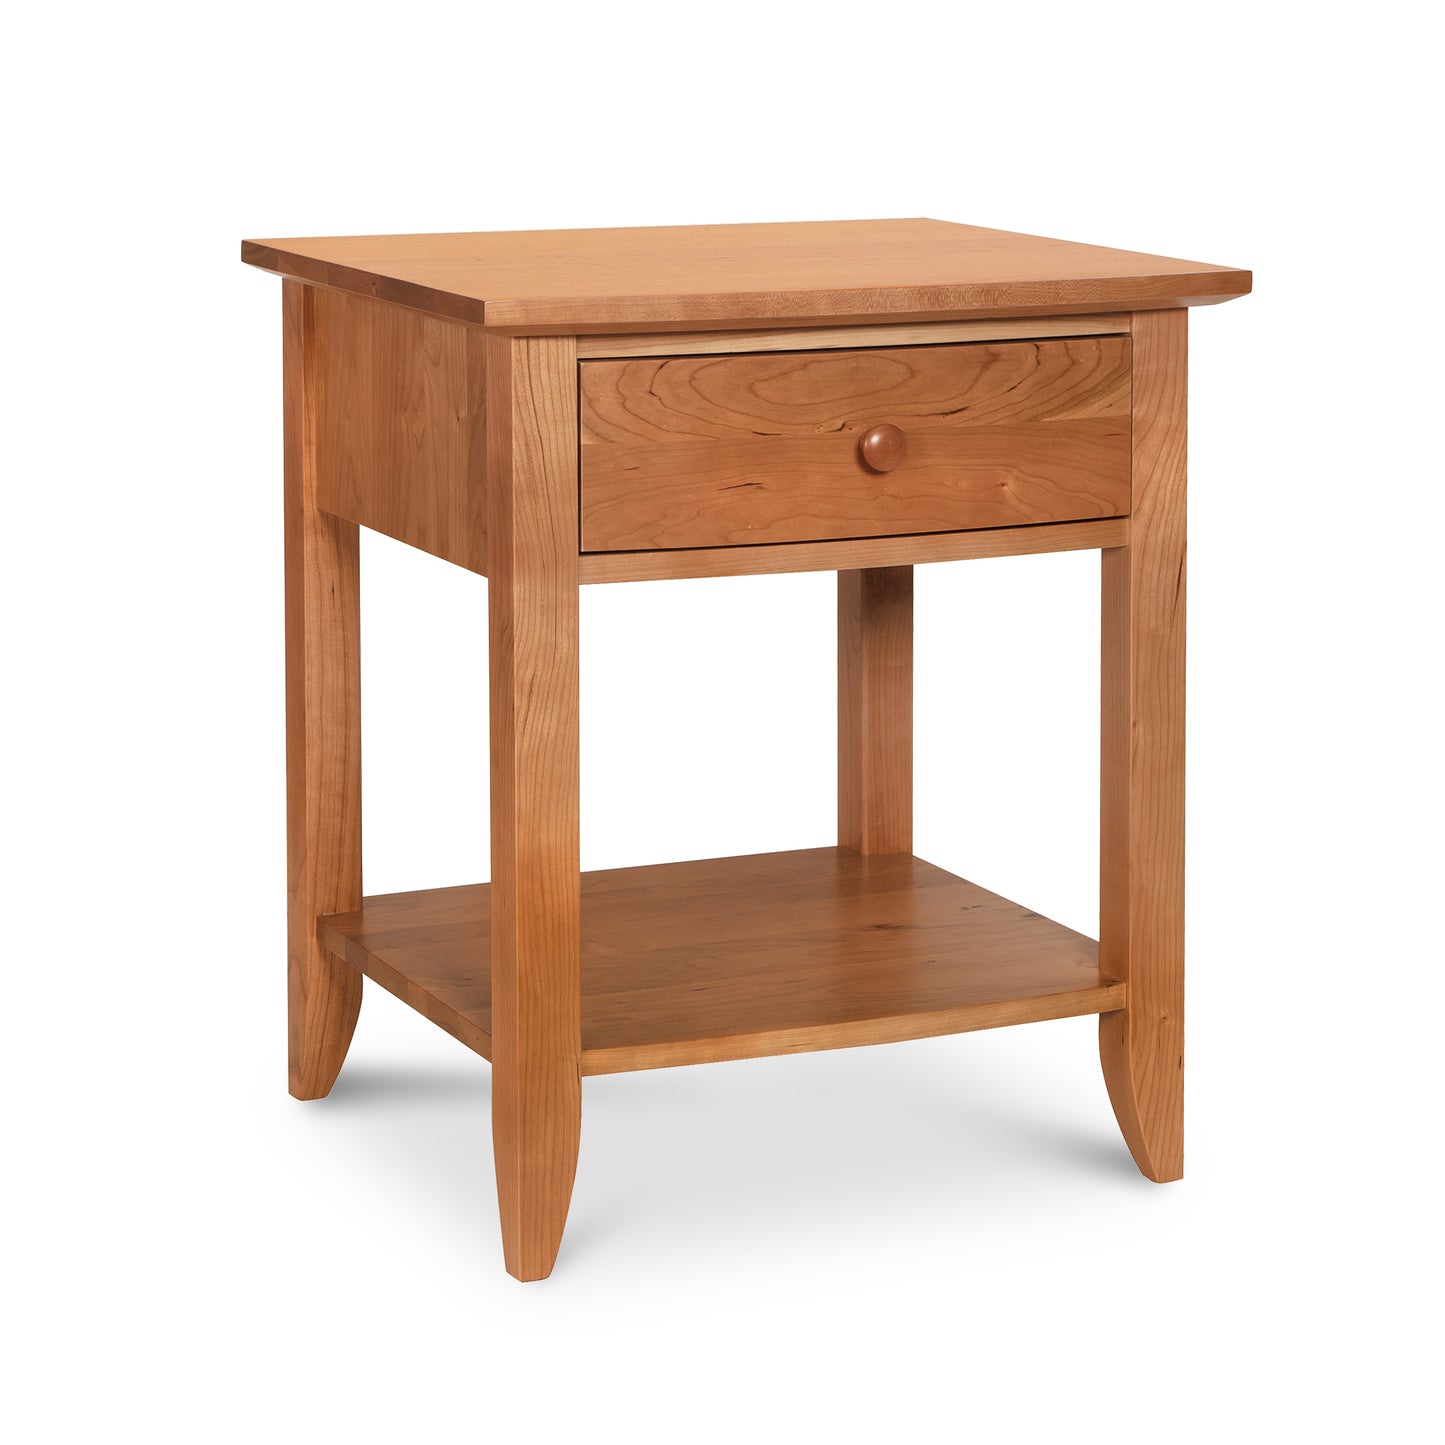 A Bow Front 1-Drawer Open Shelf Nightstand from Lyndon Furniture Collection.